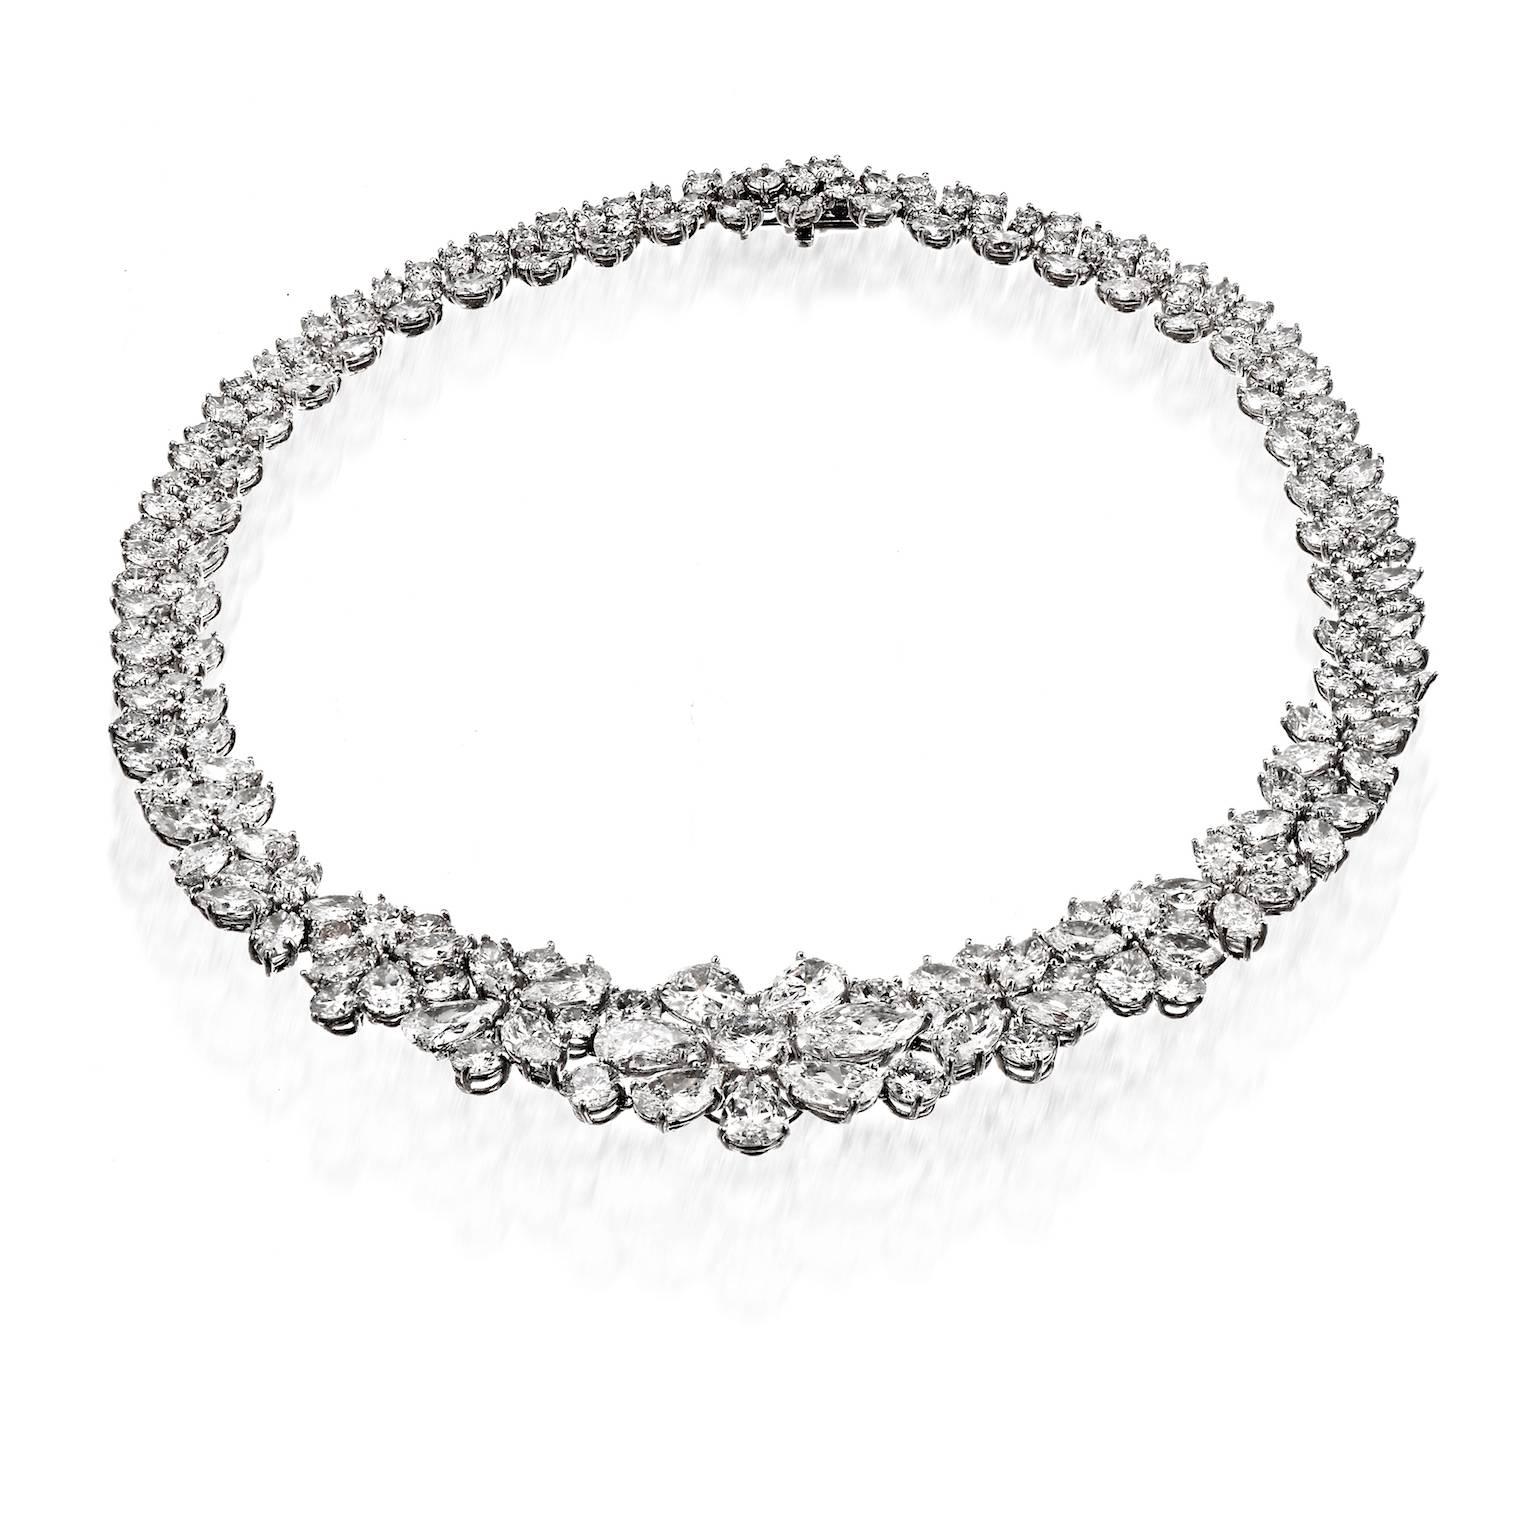 Platinum 76.00 Carat Diamond Collar Necklace.

This stunning diamond necklace is crafted with substantial size diamonds all throughout. 

The focal point is a flower motif that is comprised of 6 pear cuts and one marquise cut diamond all mounted